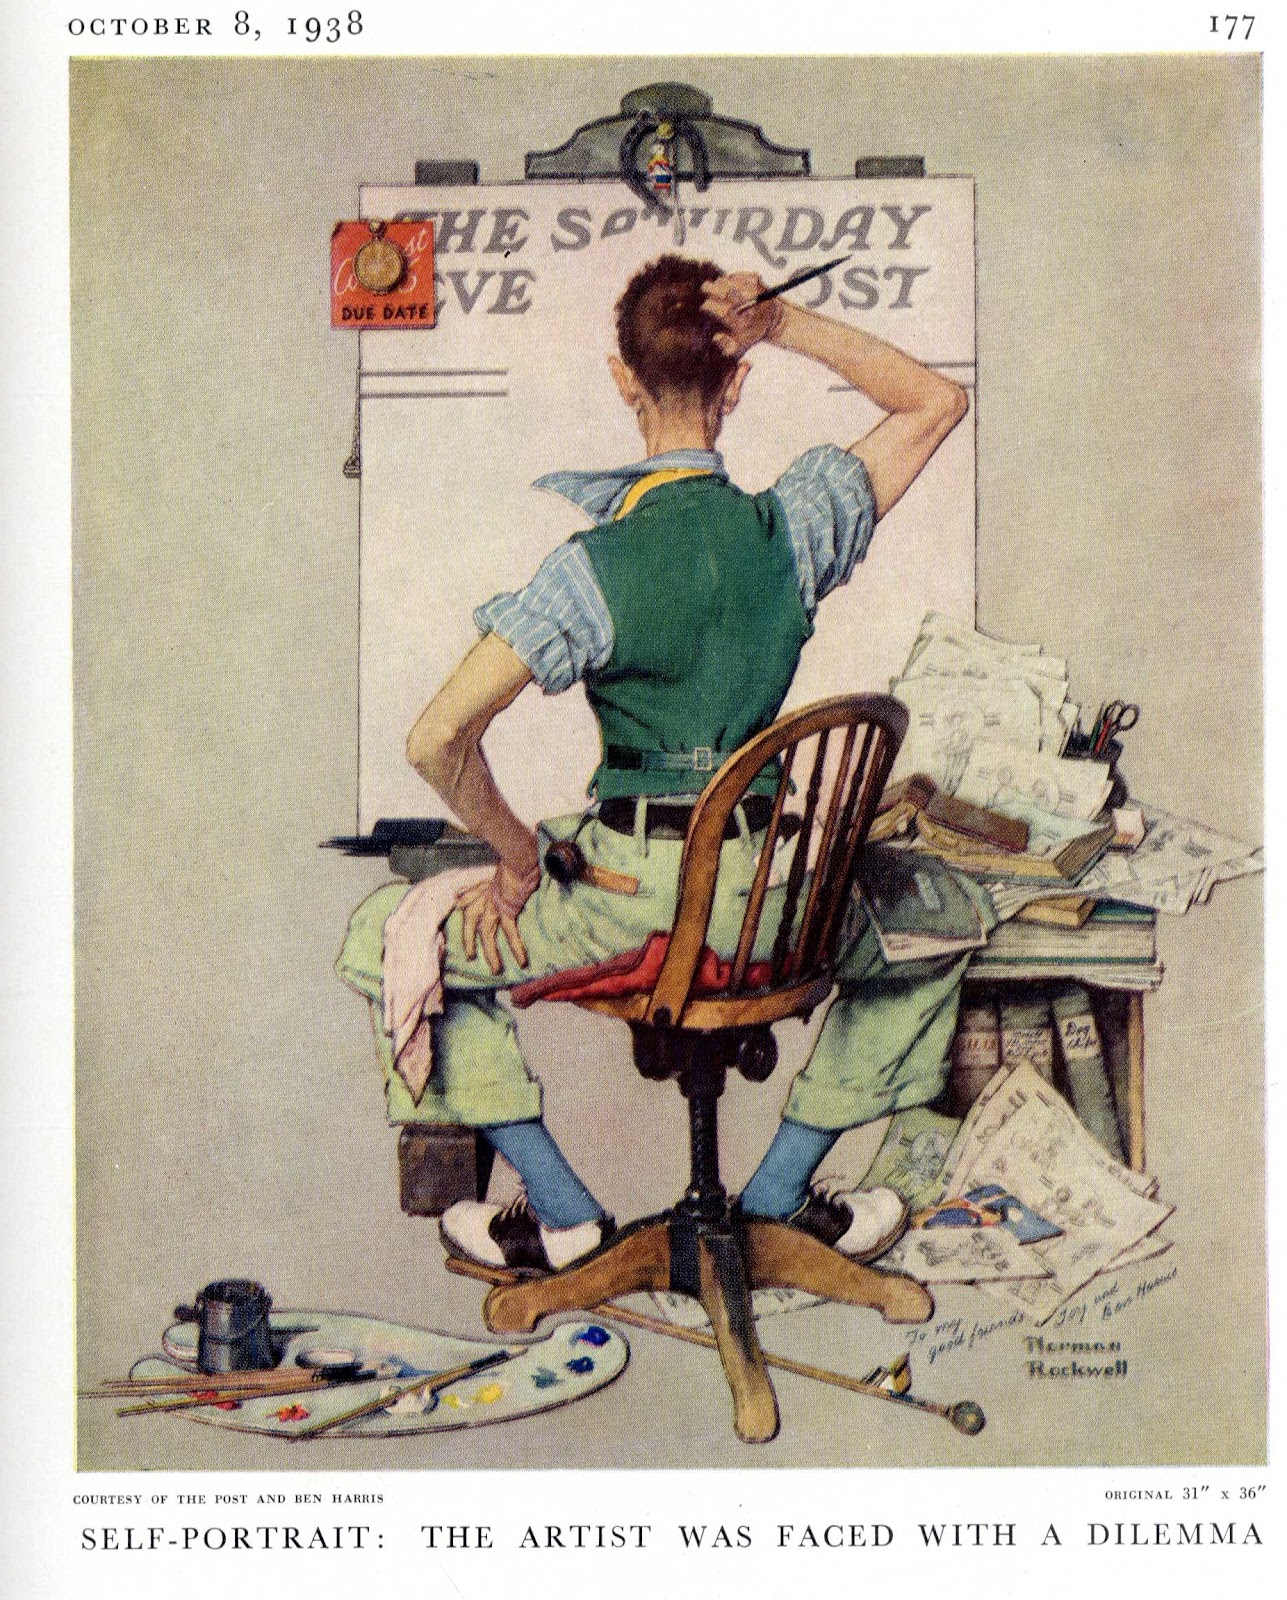 Blank Canvas (Deadline), 1938 by Norman Rockwell - Paper Print